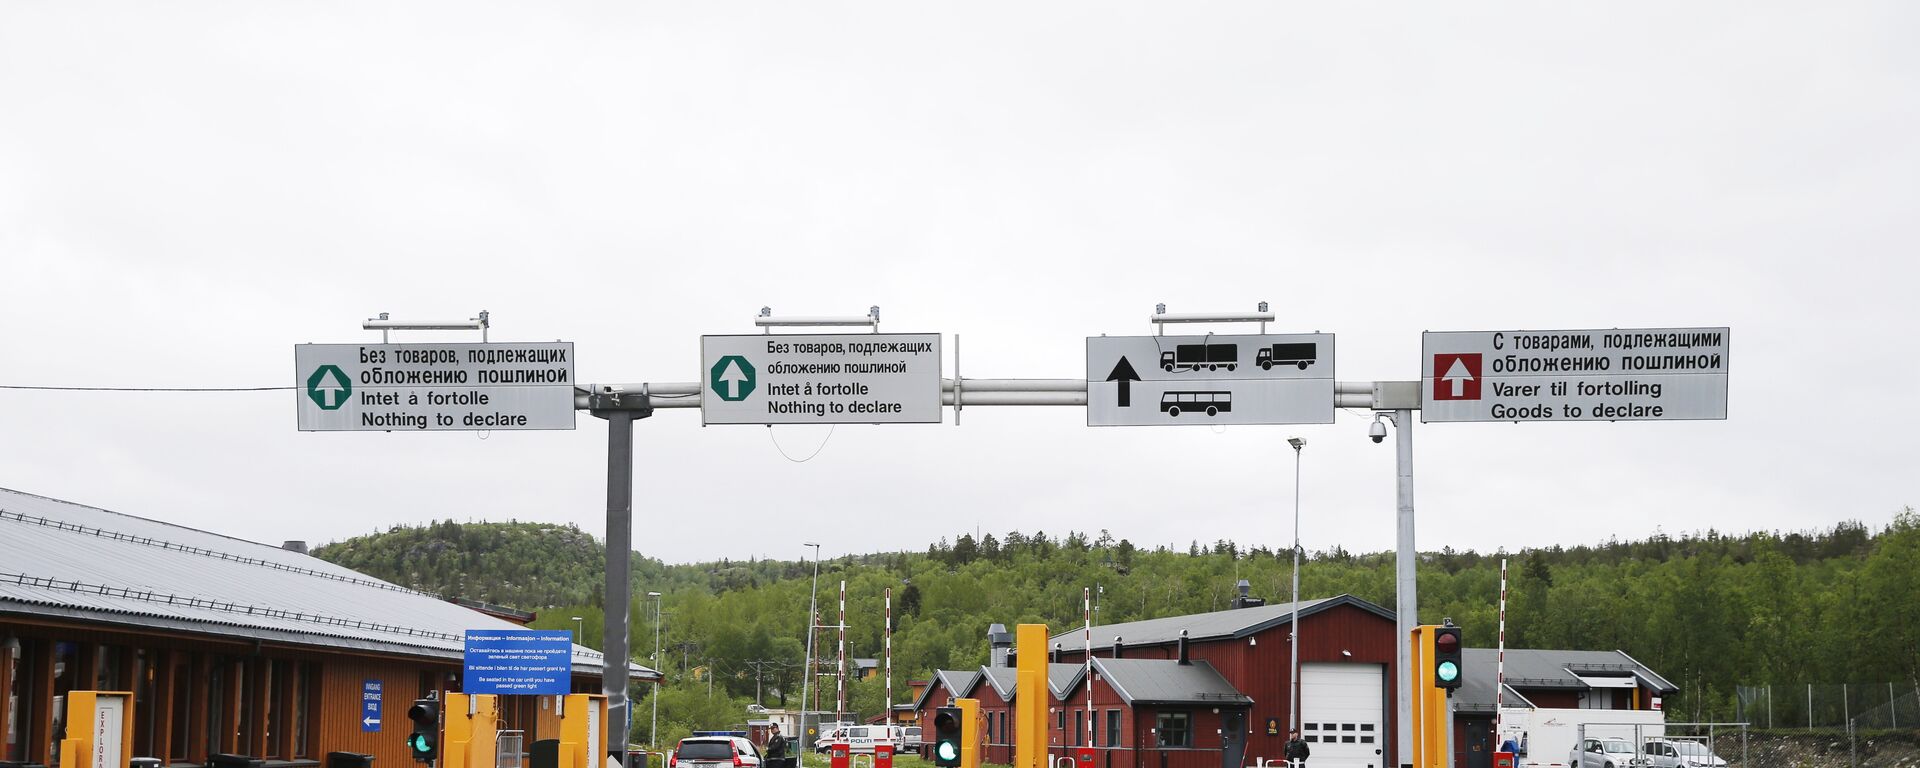 The Storskog border crossing between Norway and Russia near the Norwegian town of Kirkenes in the far north of the country - Sputnik International, 1920, 17.05.2022